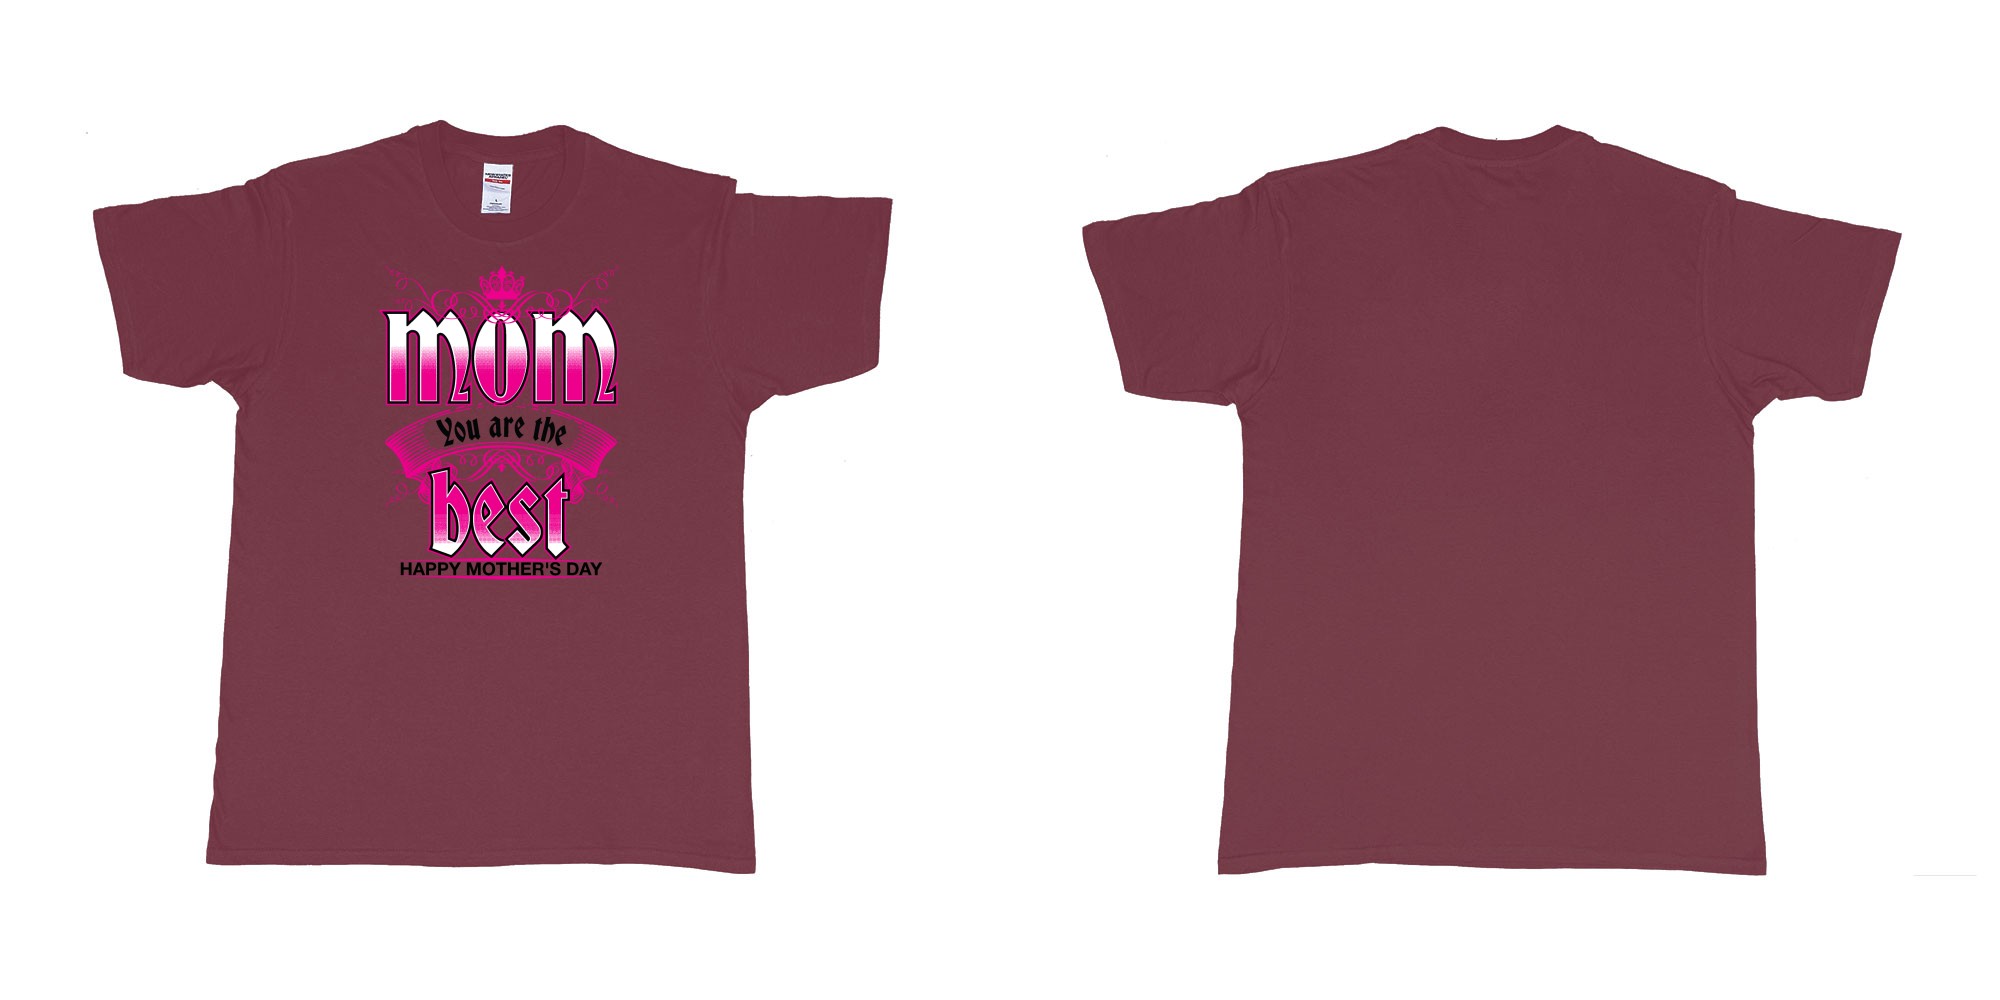 Custom tshirt design crown mom you are the best happy morthers day in fabric color marron choice your own text made in Bali by The Pirate Way